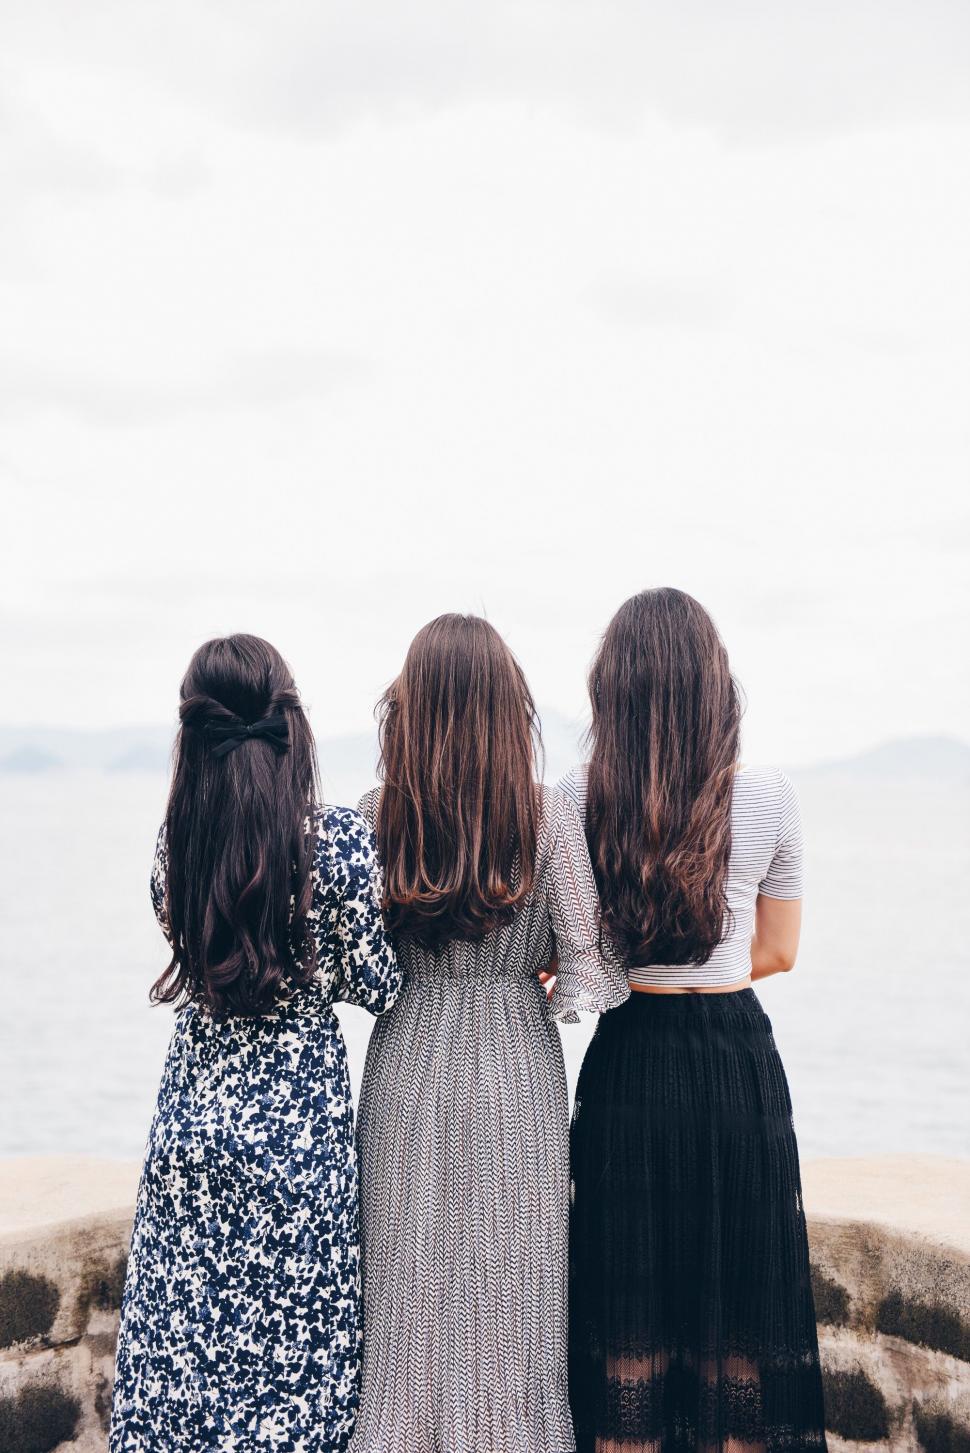 Free Image of Three Young Women With Long Hair  